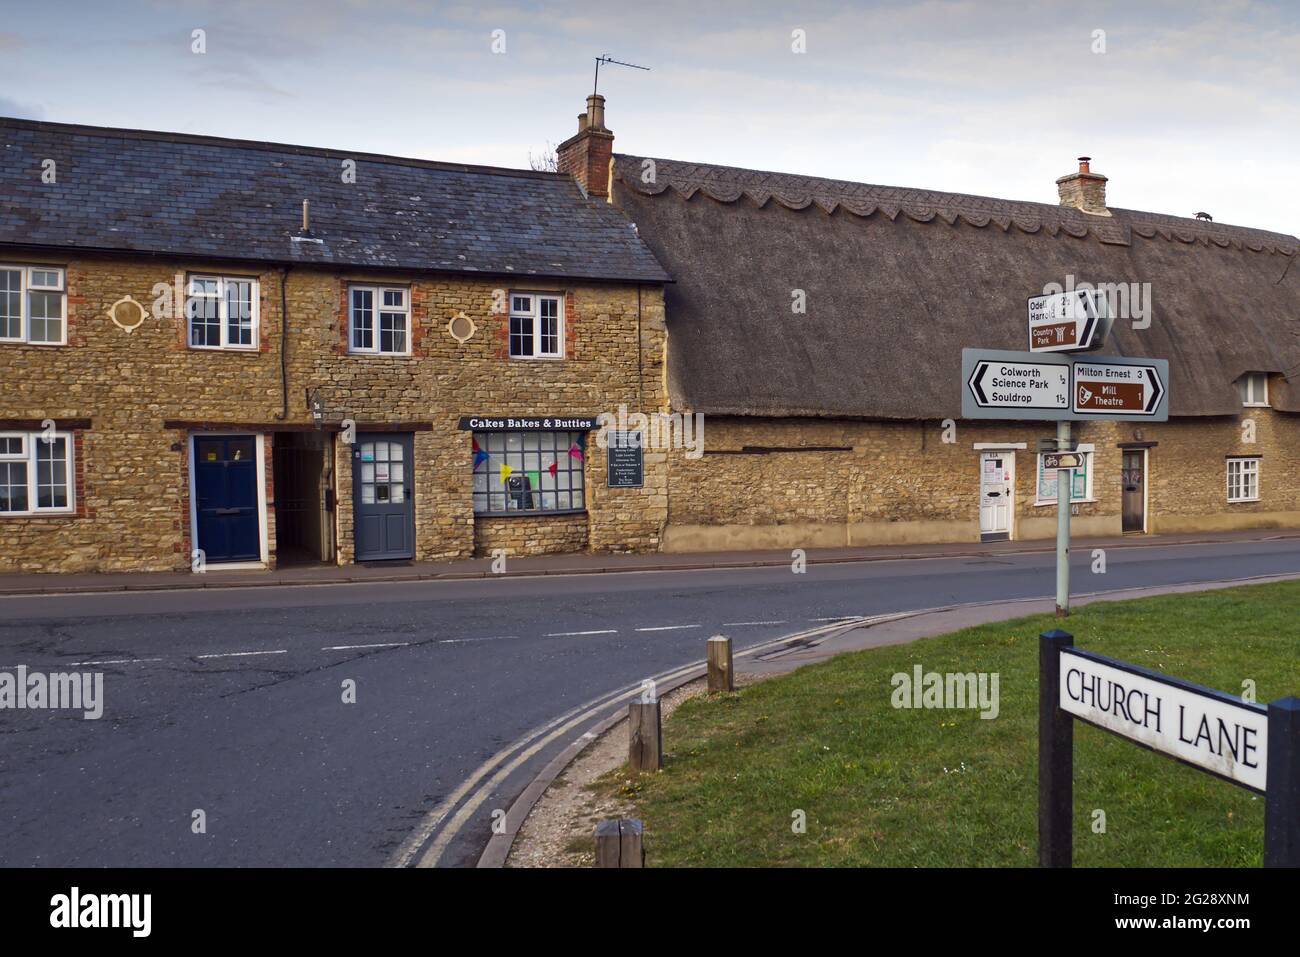 Shops and cottages on village green in Sharnbrook, Bedfordhire, England, UK Stock Photo